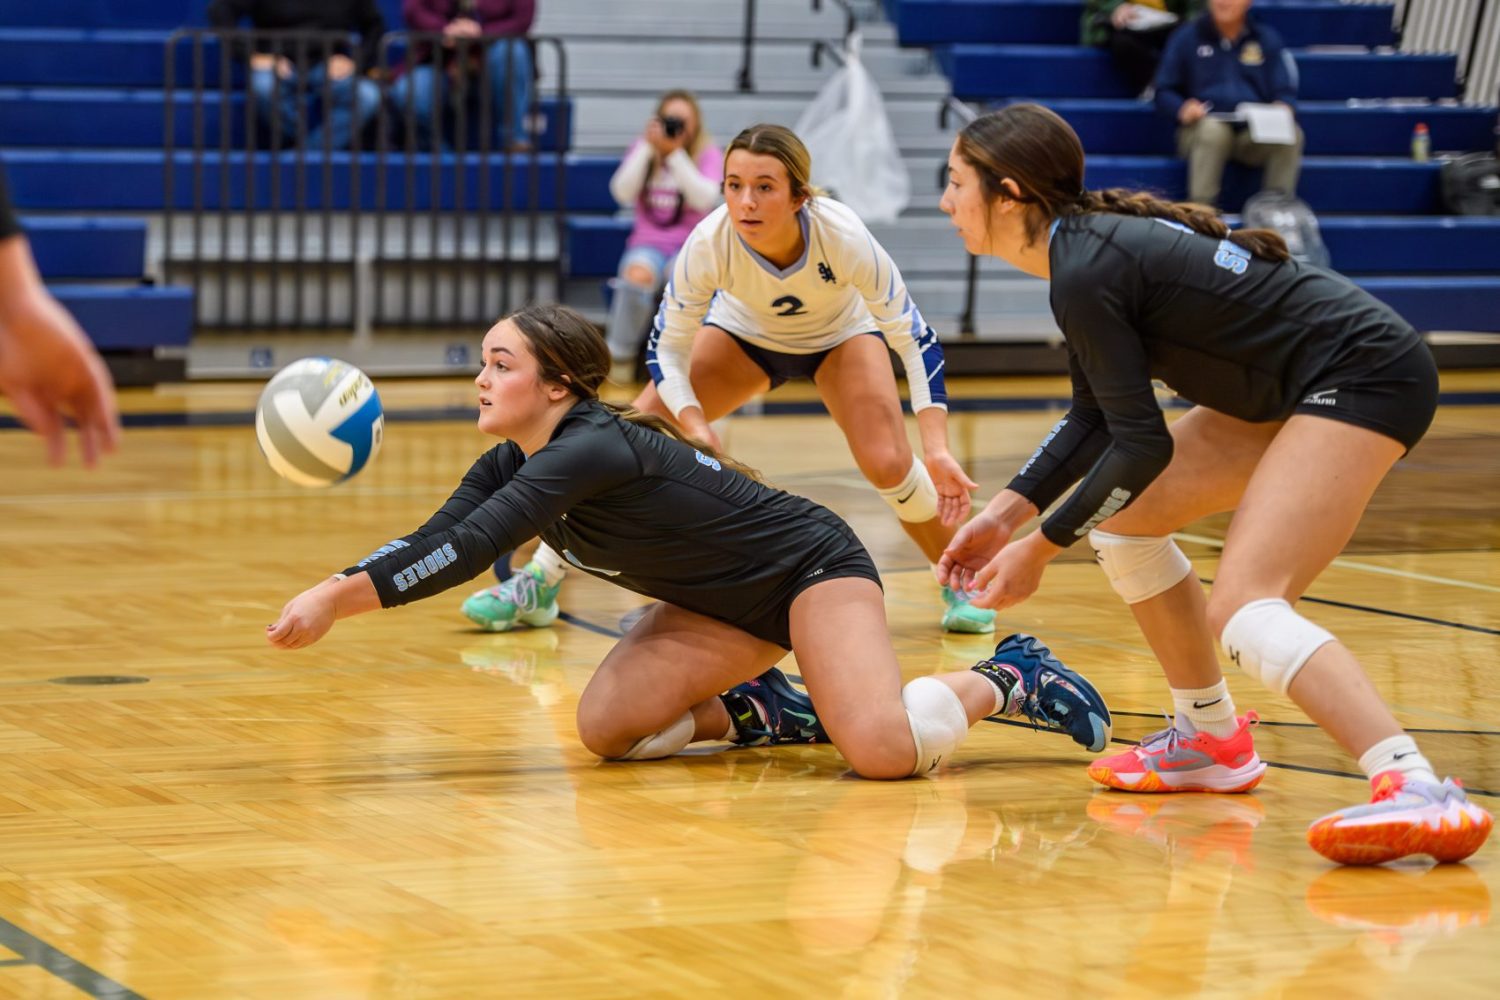 Volleyball scores from Wednesday night; Pairings for Thursday’s district finals